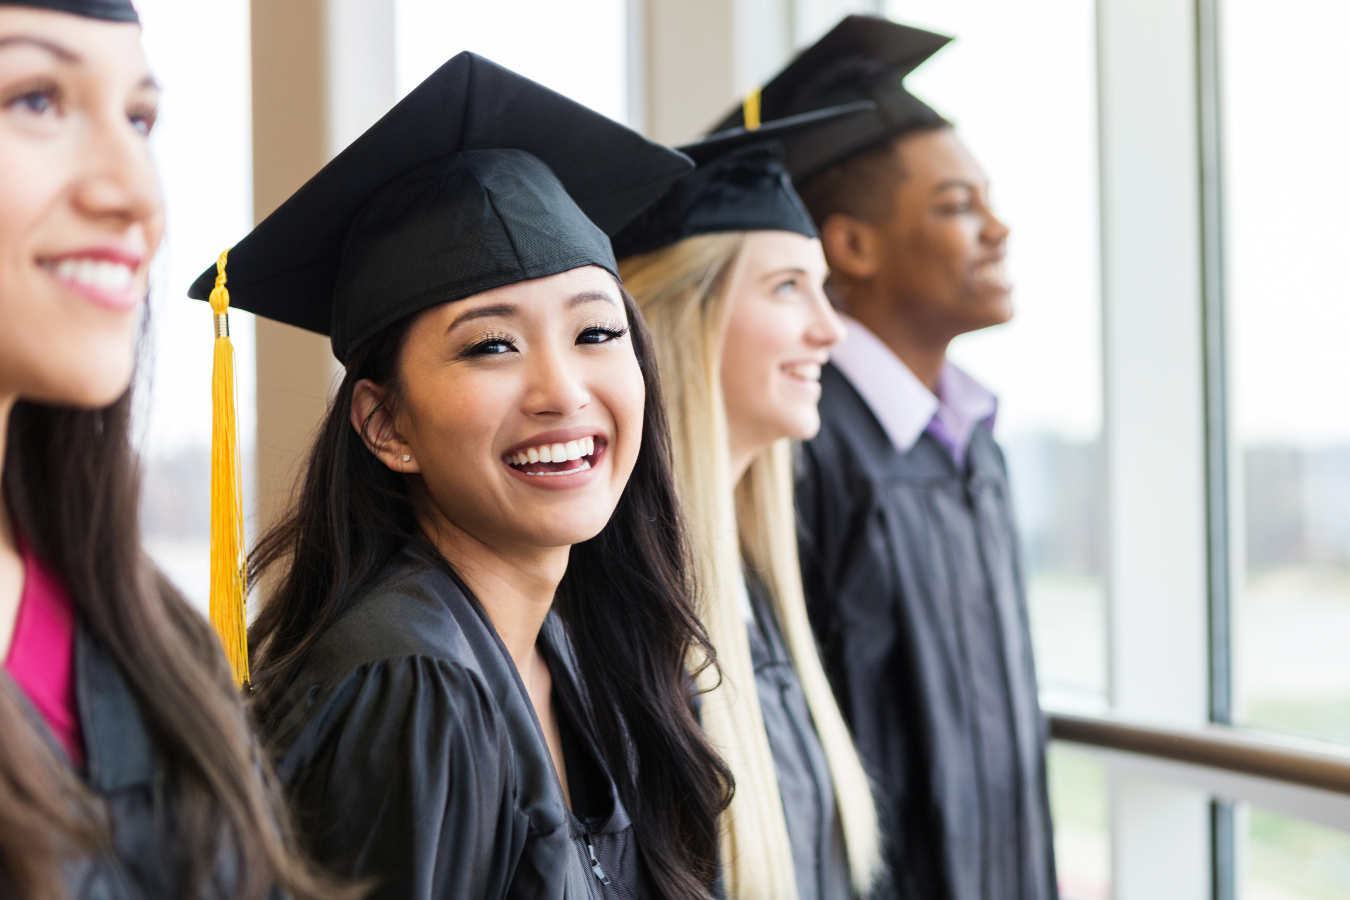 A group of high school students stand in their graduation gowns, with one girl smiling towards the camera. ERP solutions help K-12 organizations manage their finances, human resources, and payroll, to help schools focus on the success of their students.